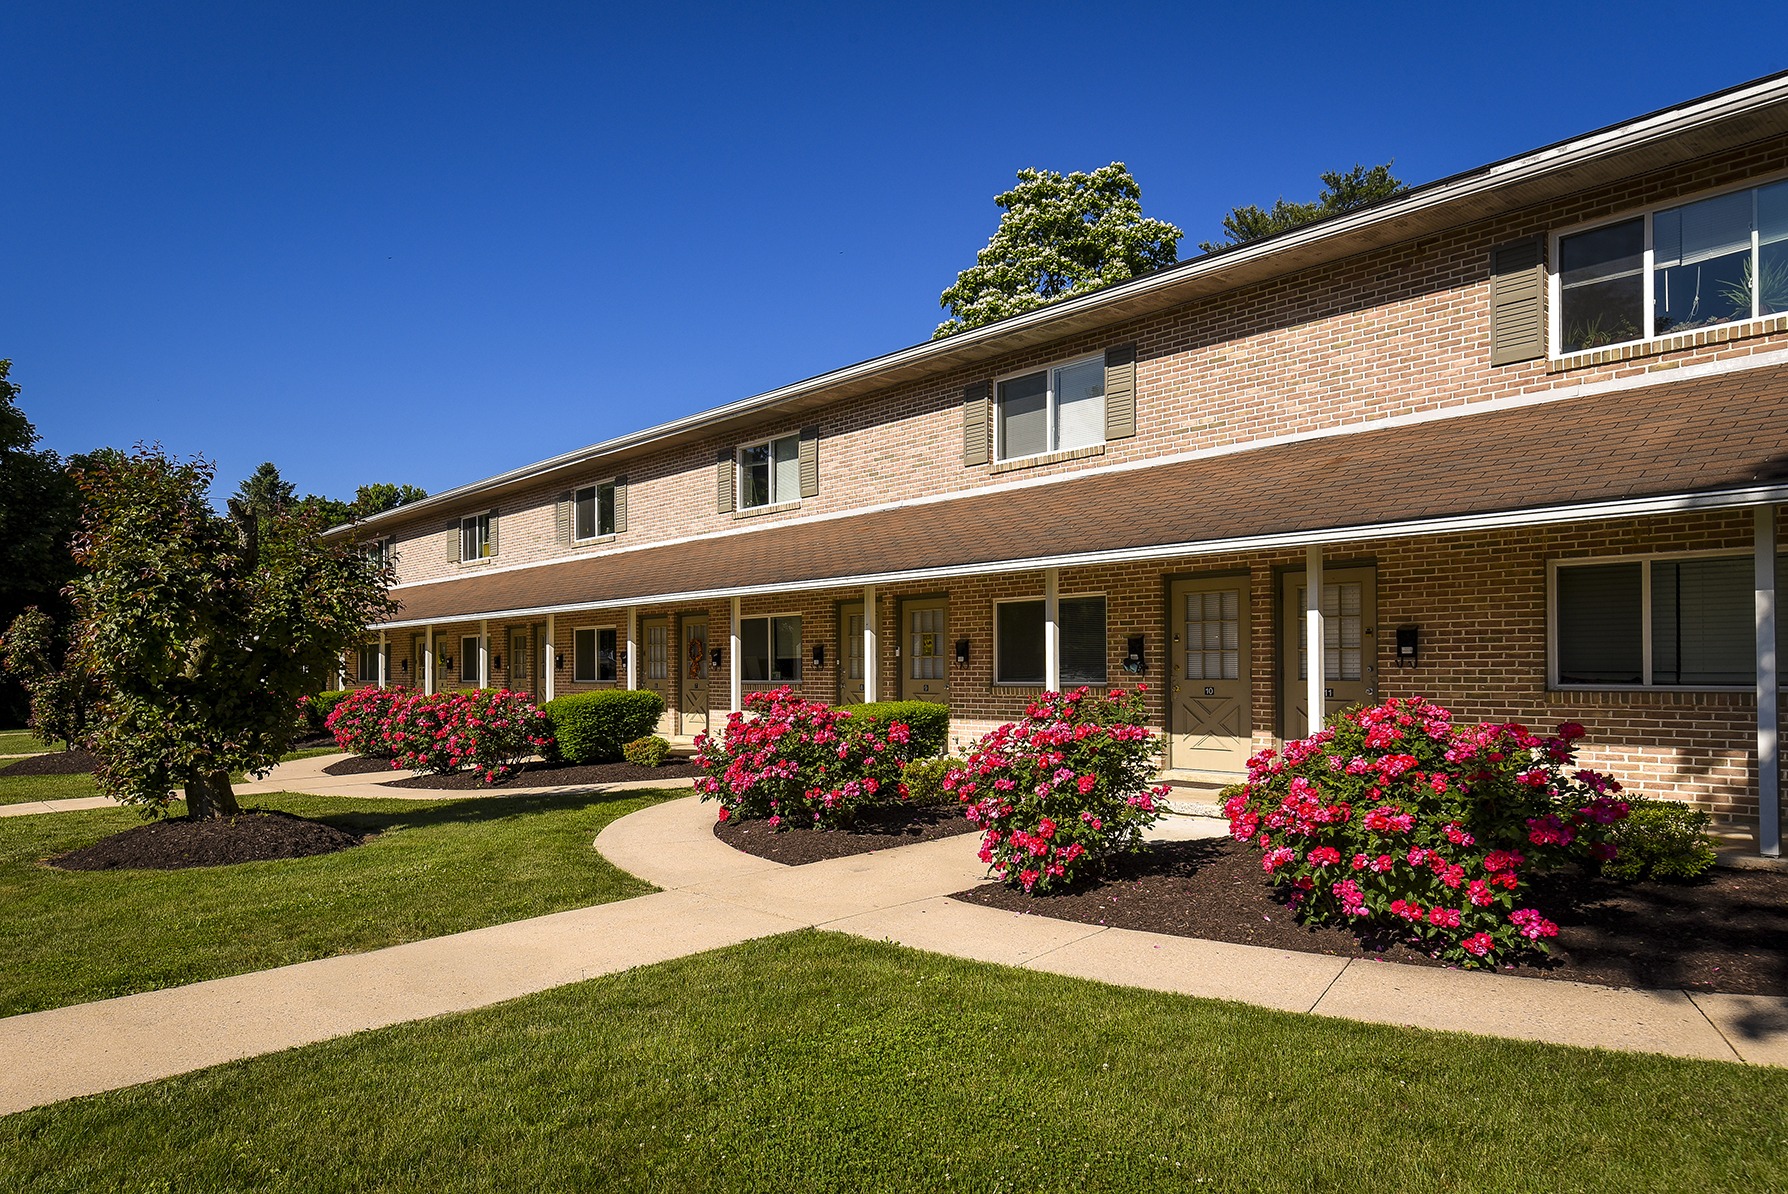 Park Court apartments exterior view landscaped with pink bushes and manicured lawn